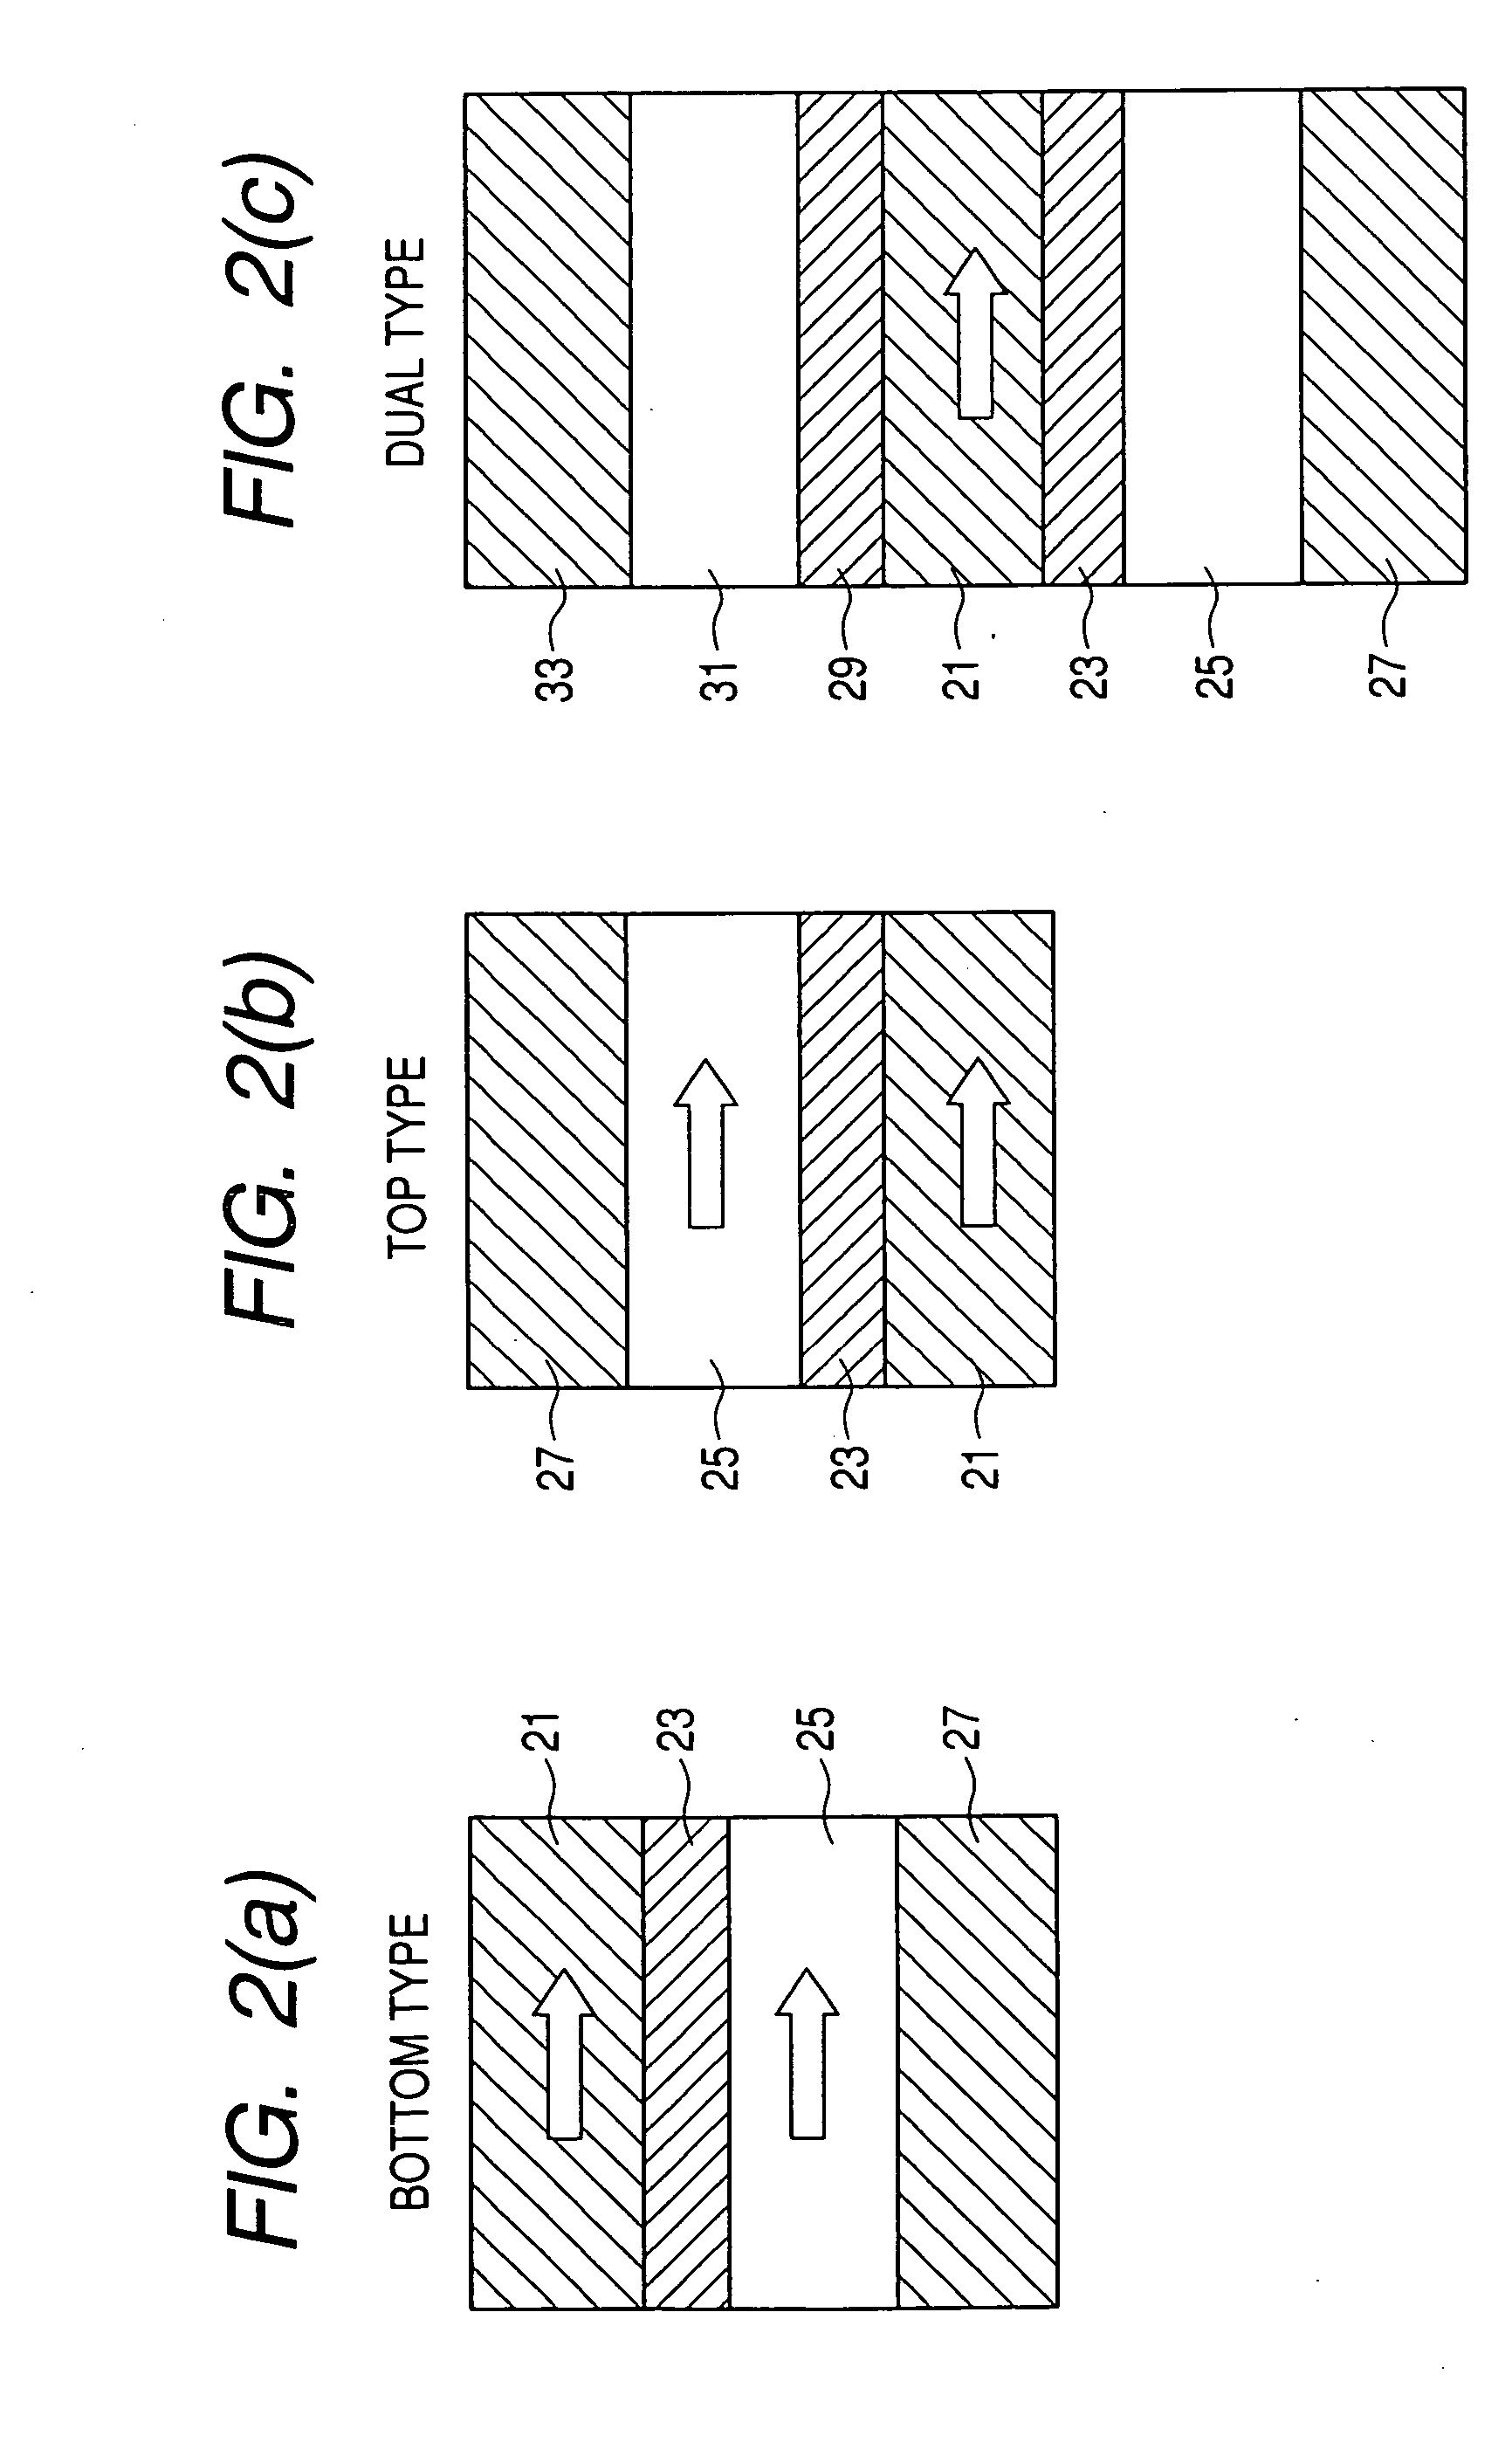 Granular type free layer and magnetic head